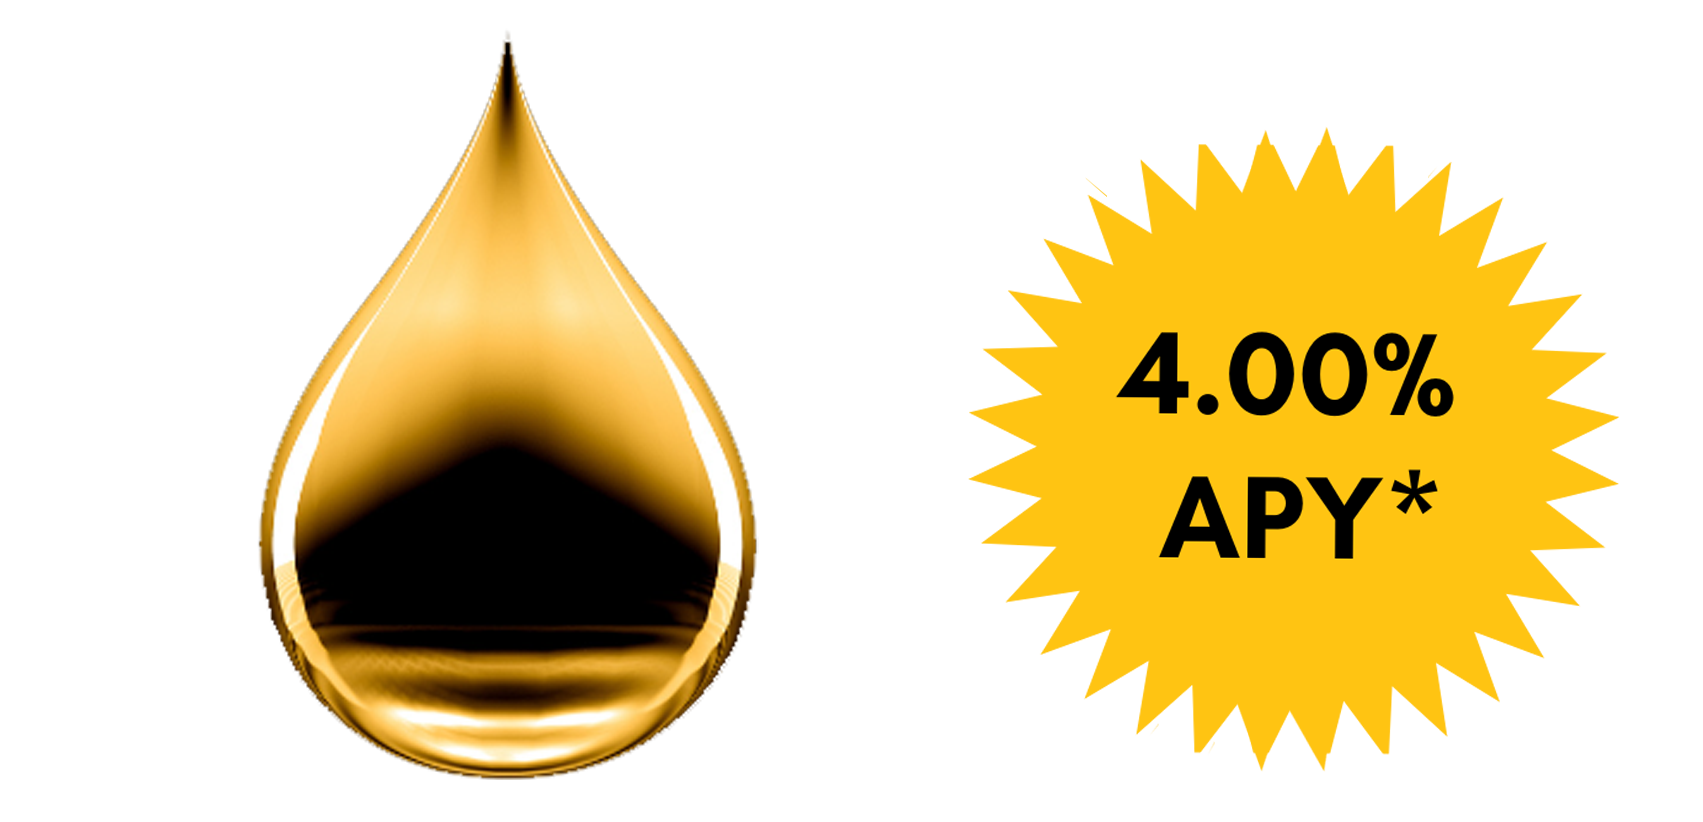 gold droplet of water and star with rate of 4.00% APY* displayed